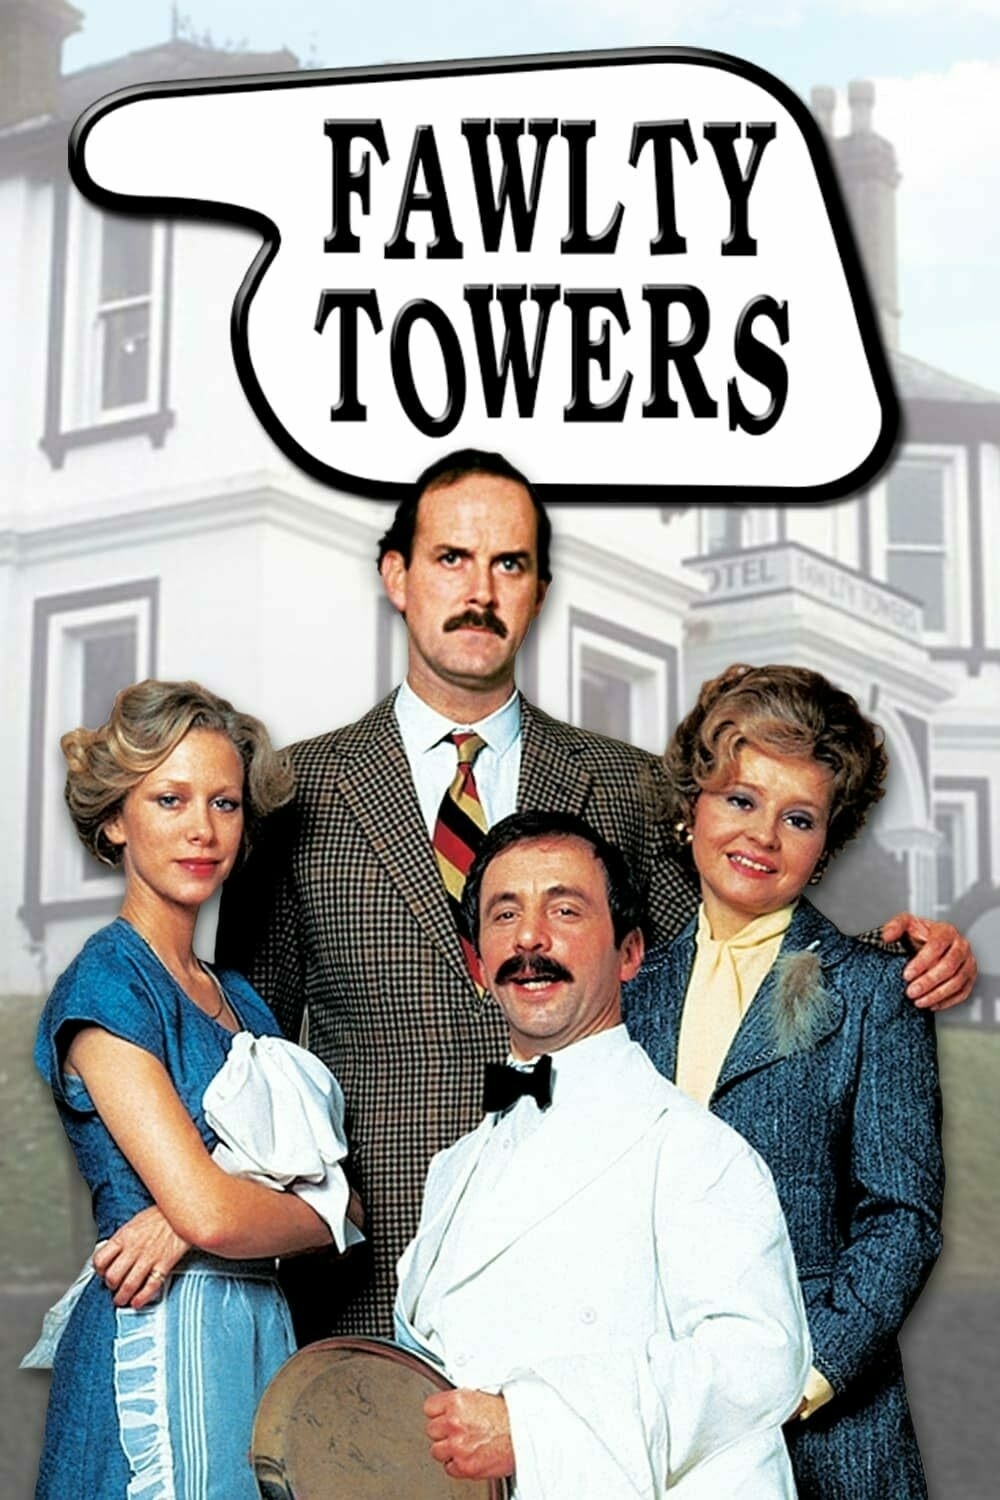 Four people pose in front of a building, with 'FAWLTY TOWERS' in a speech bubble above. Two men in suits and two women in dresses, one carrying a cloth.